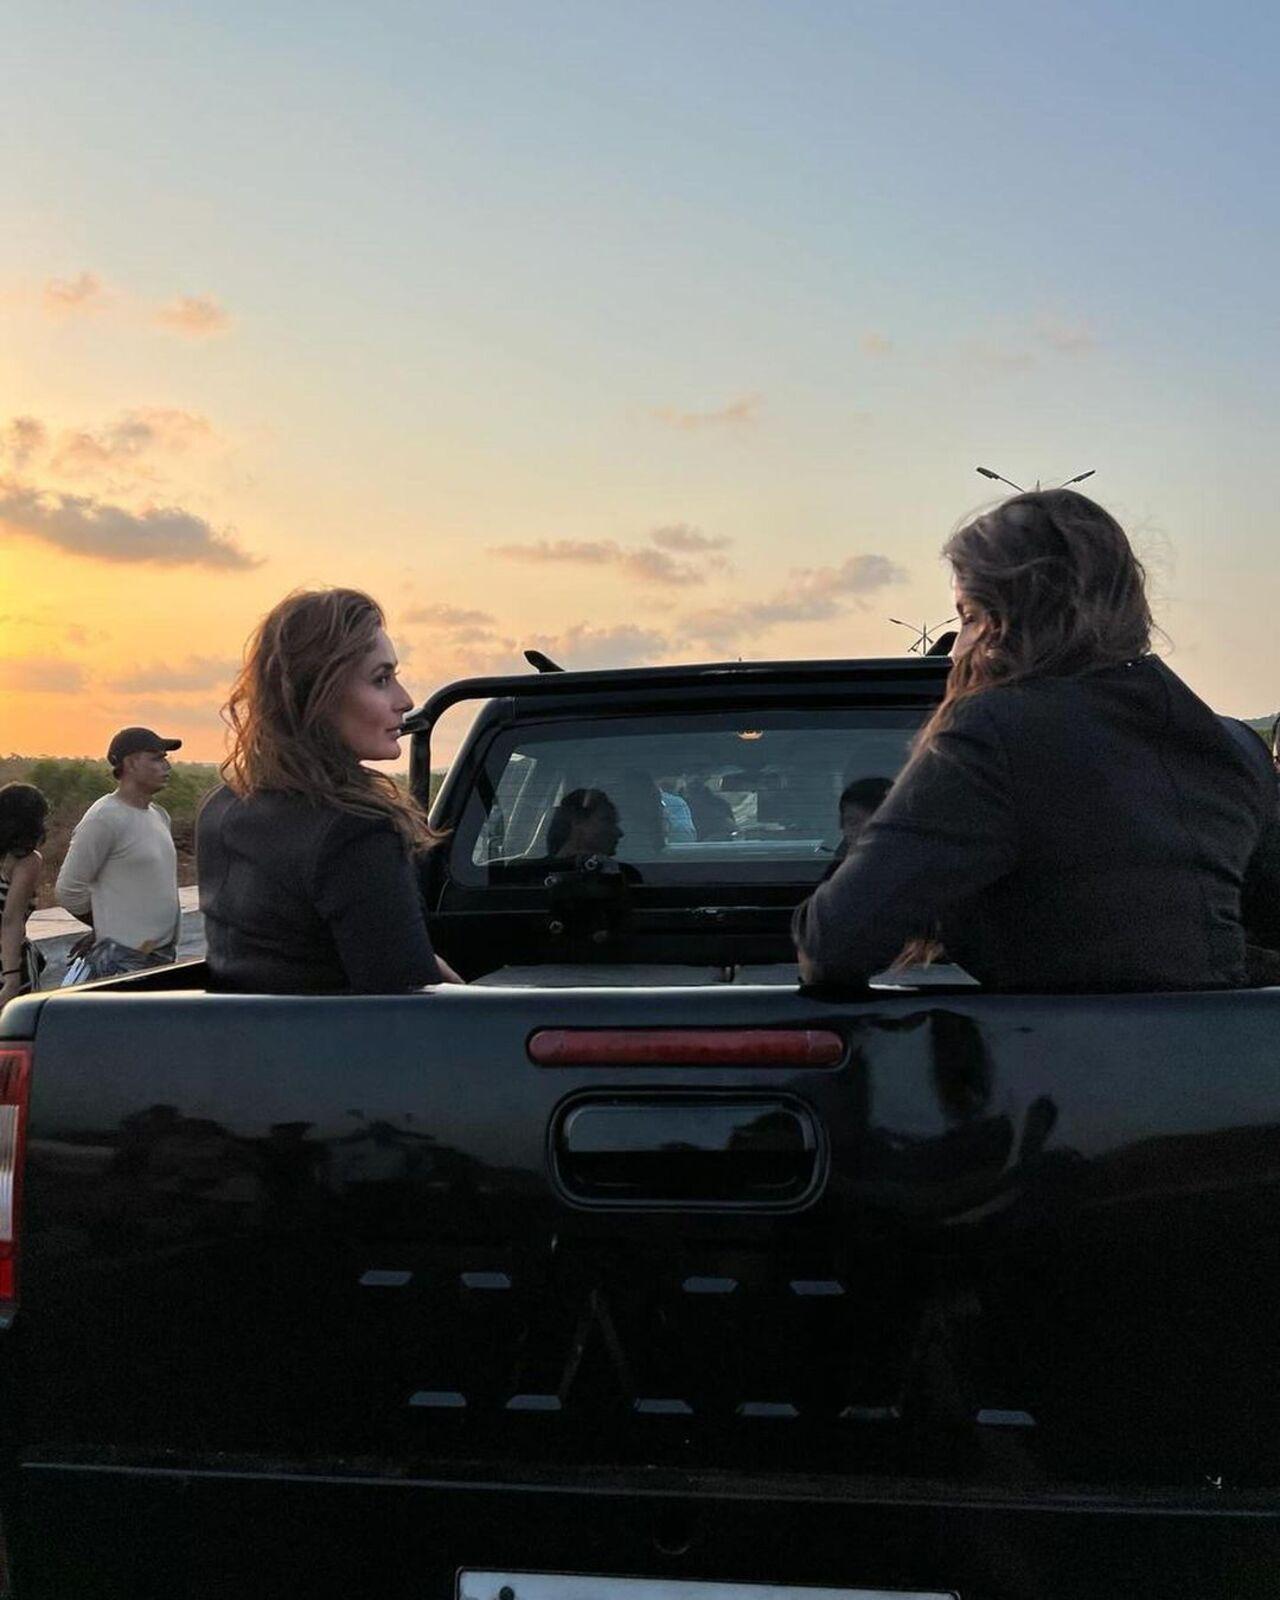 Earlier Kareena shared BTS pictures from an outdoor shoot that show her seated in a pickup truck. 